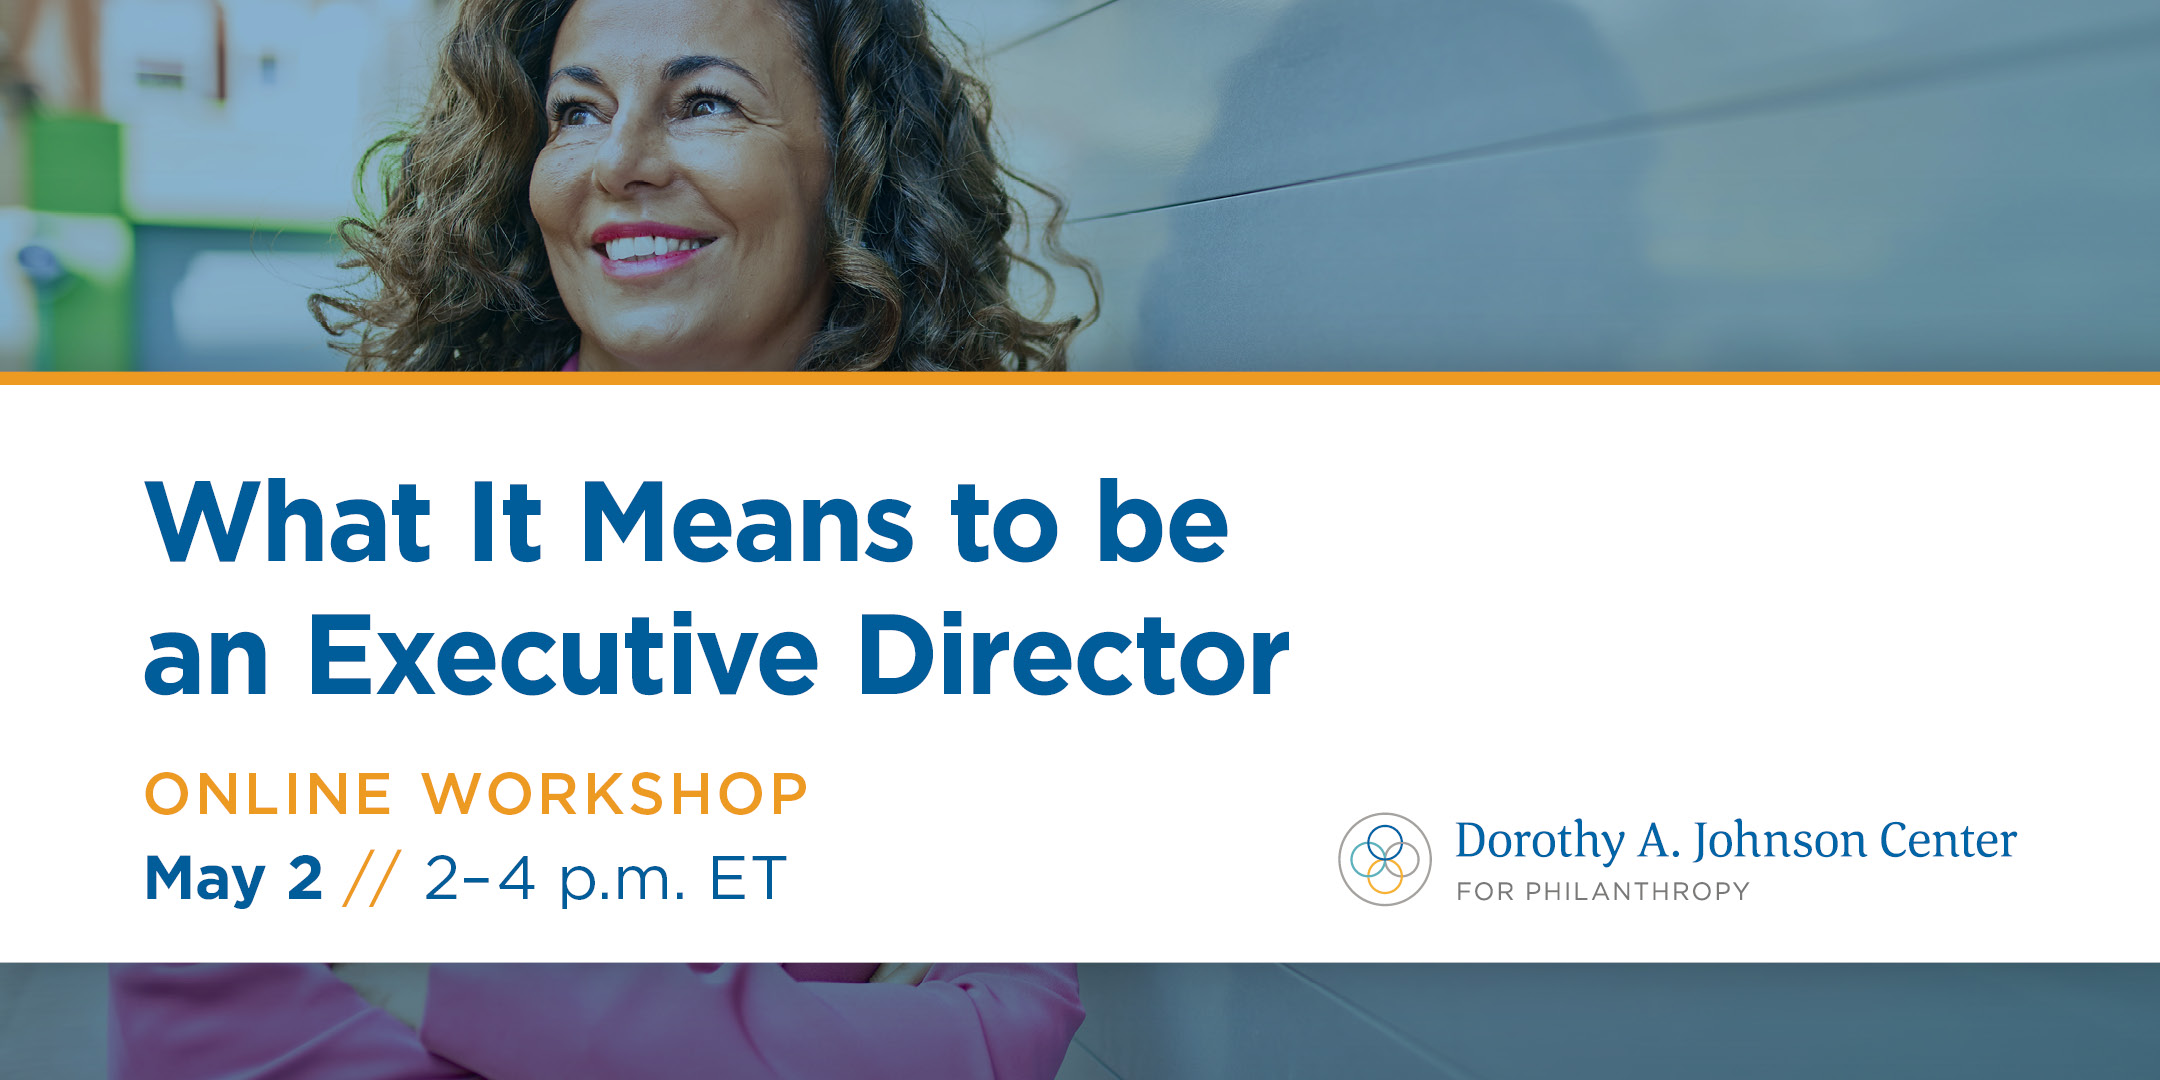 What It Means to be an Executive Director